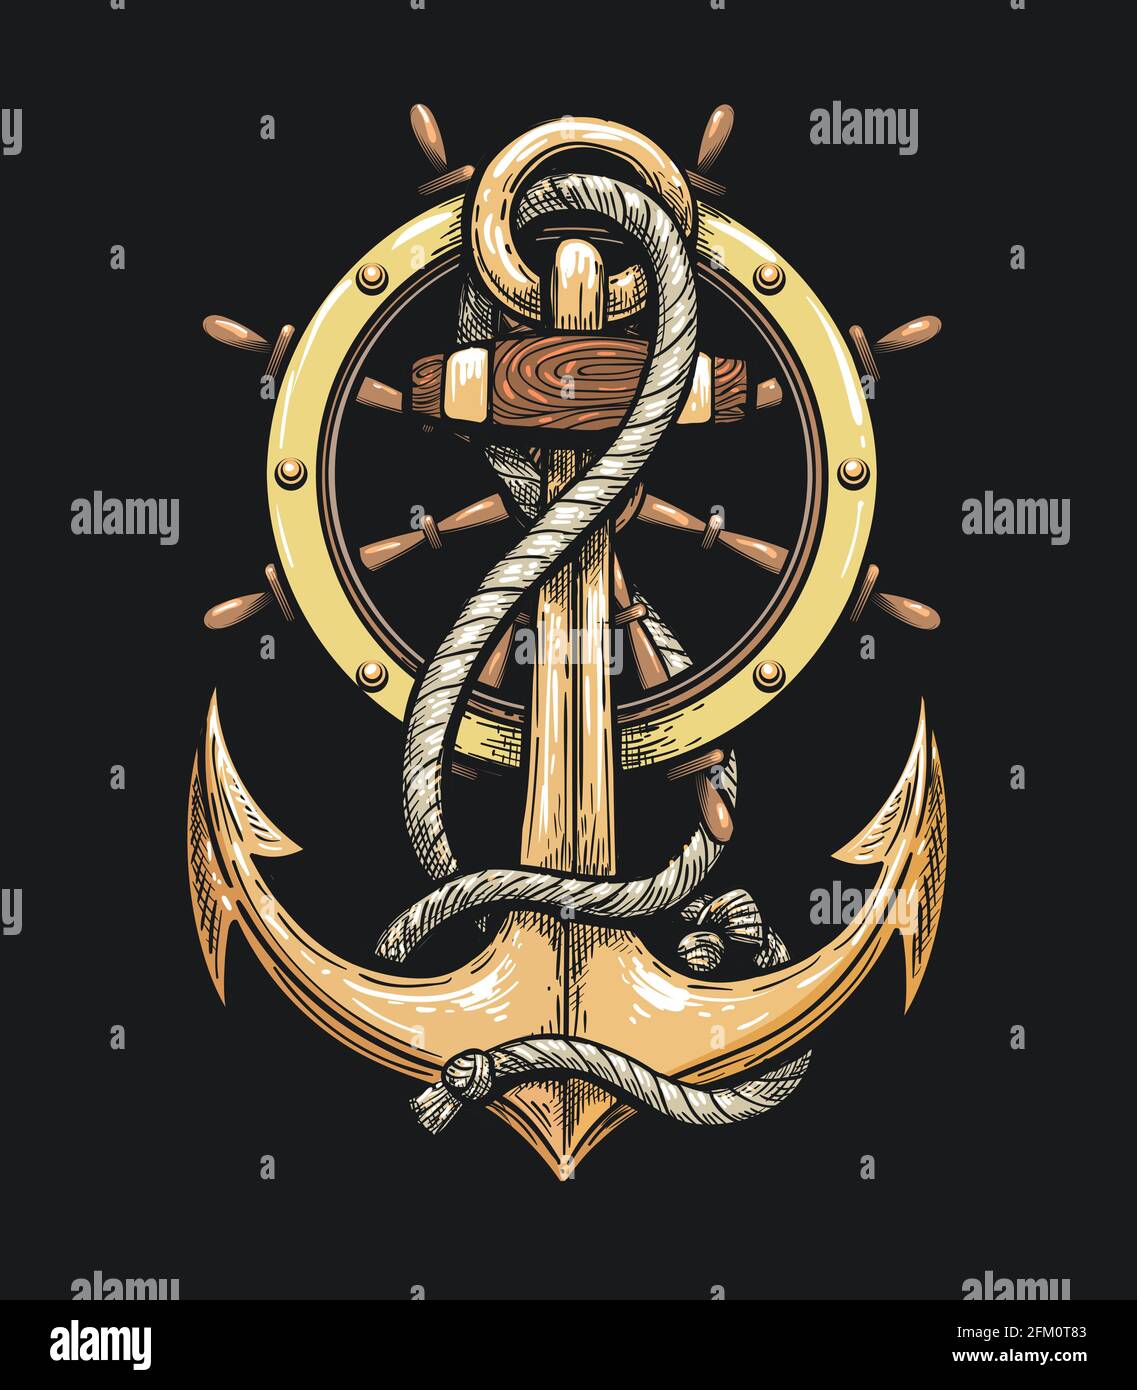 27 Awesome wheel and anchor tattoo meaning images  Anchor tattoo men Anchor  tattoos Wheel tattoo